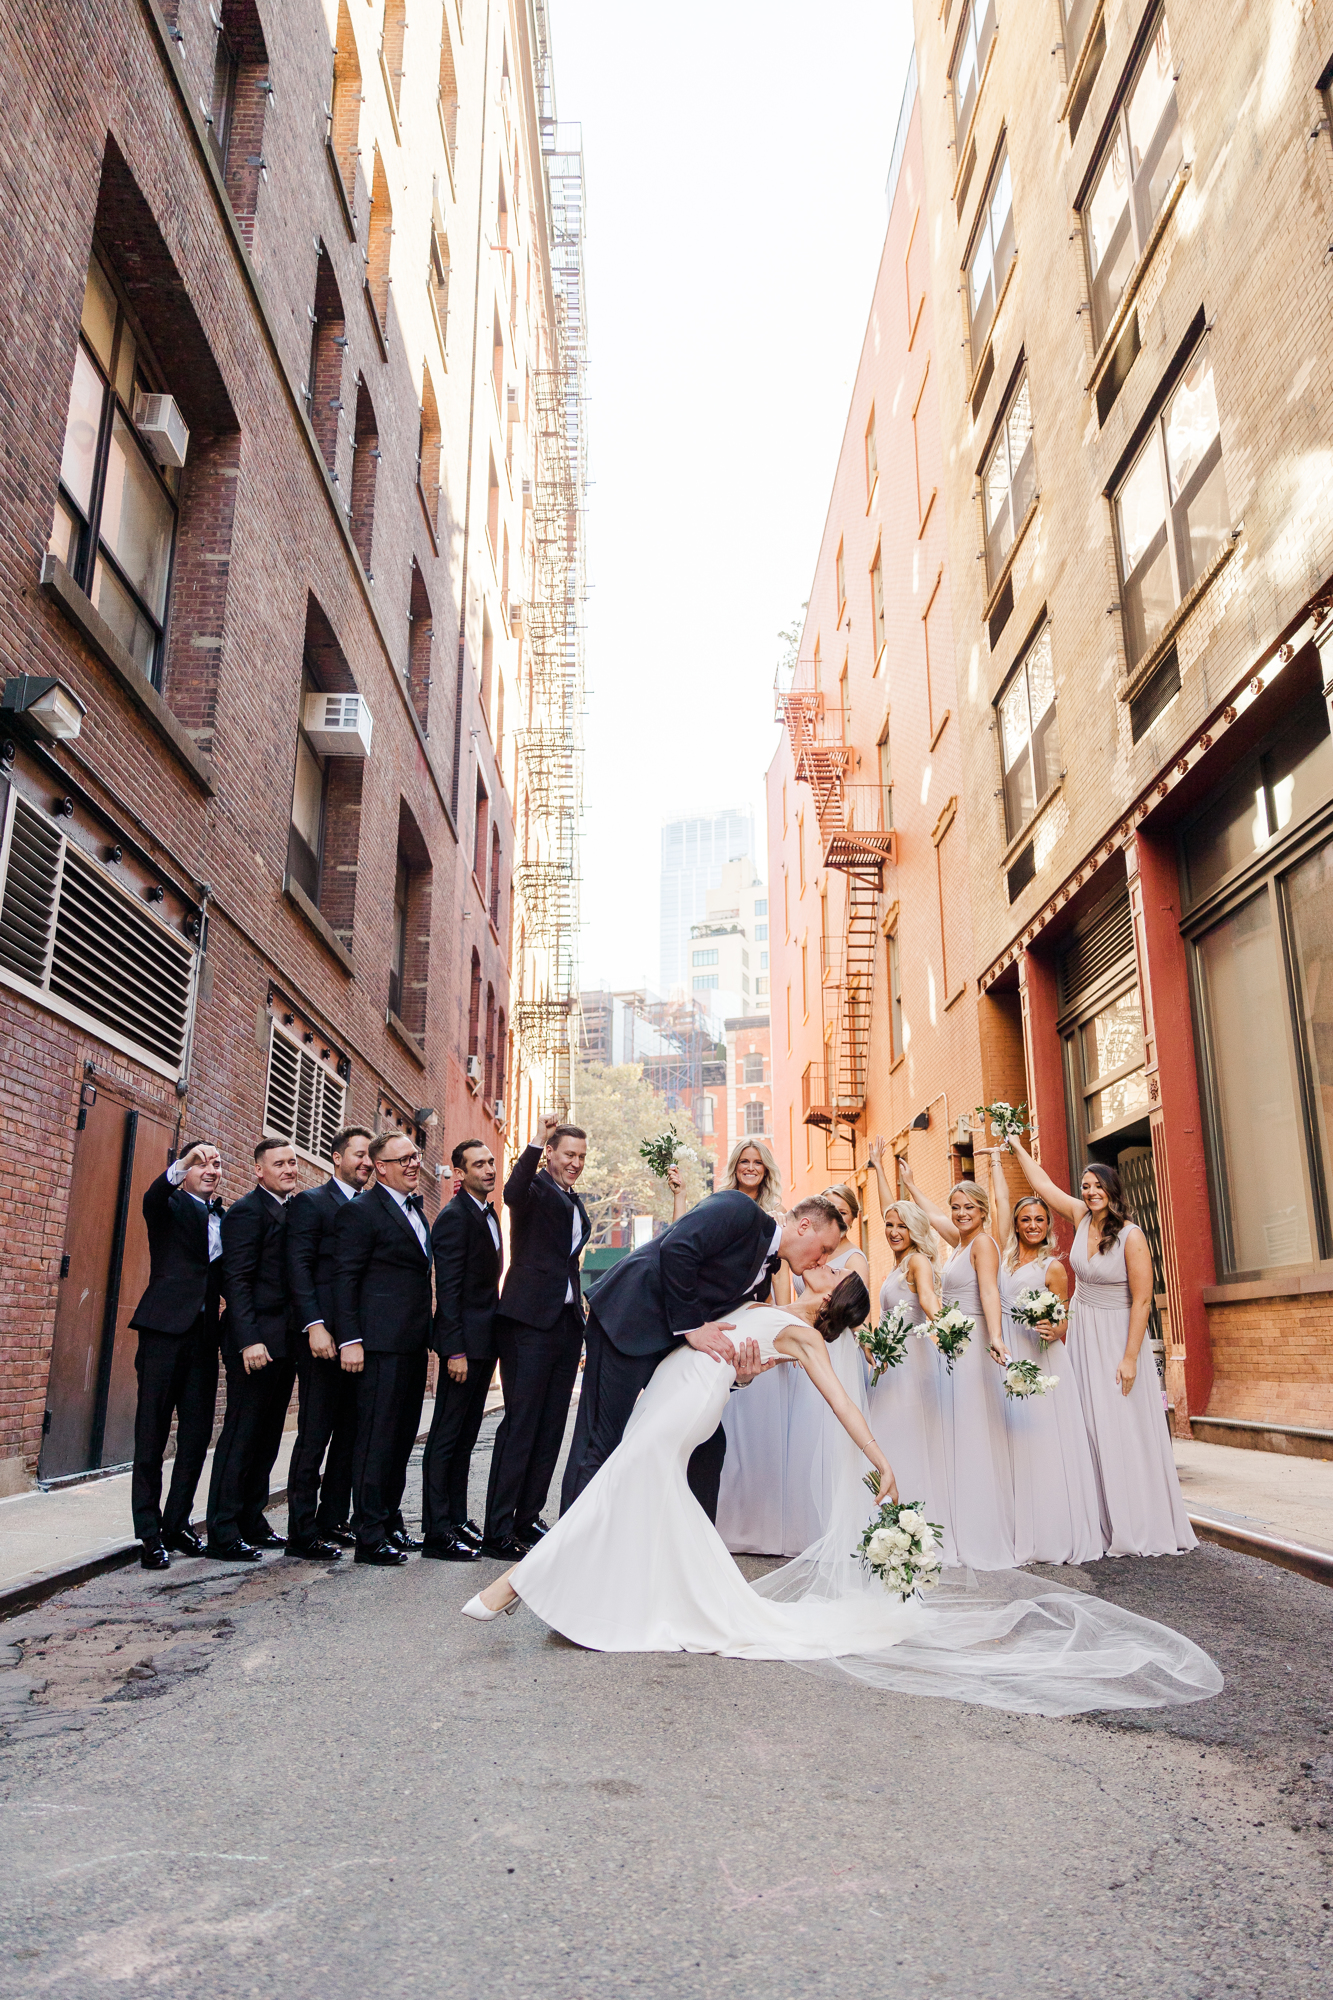 Jaw-dropping Wedding at St. Francis Xavier in NYC